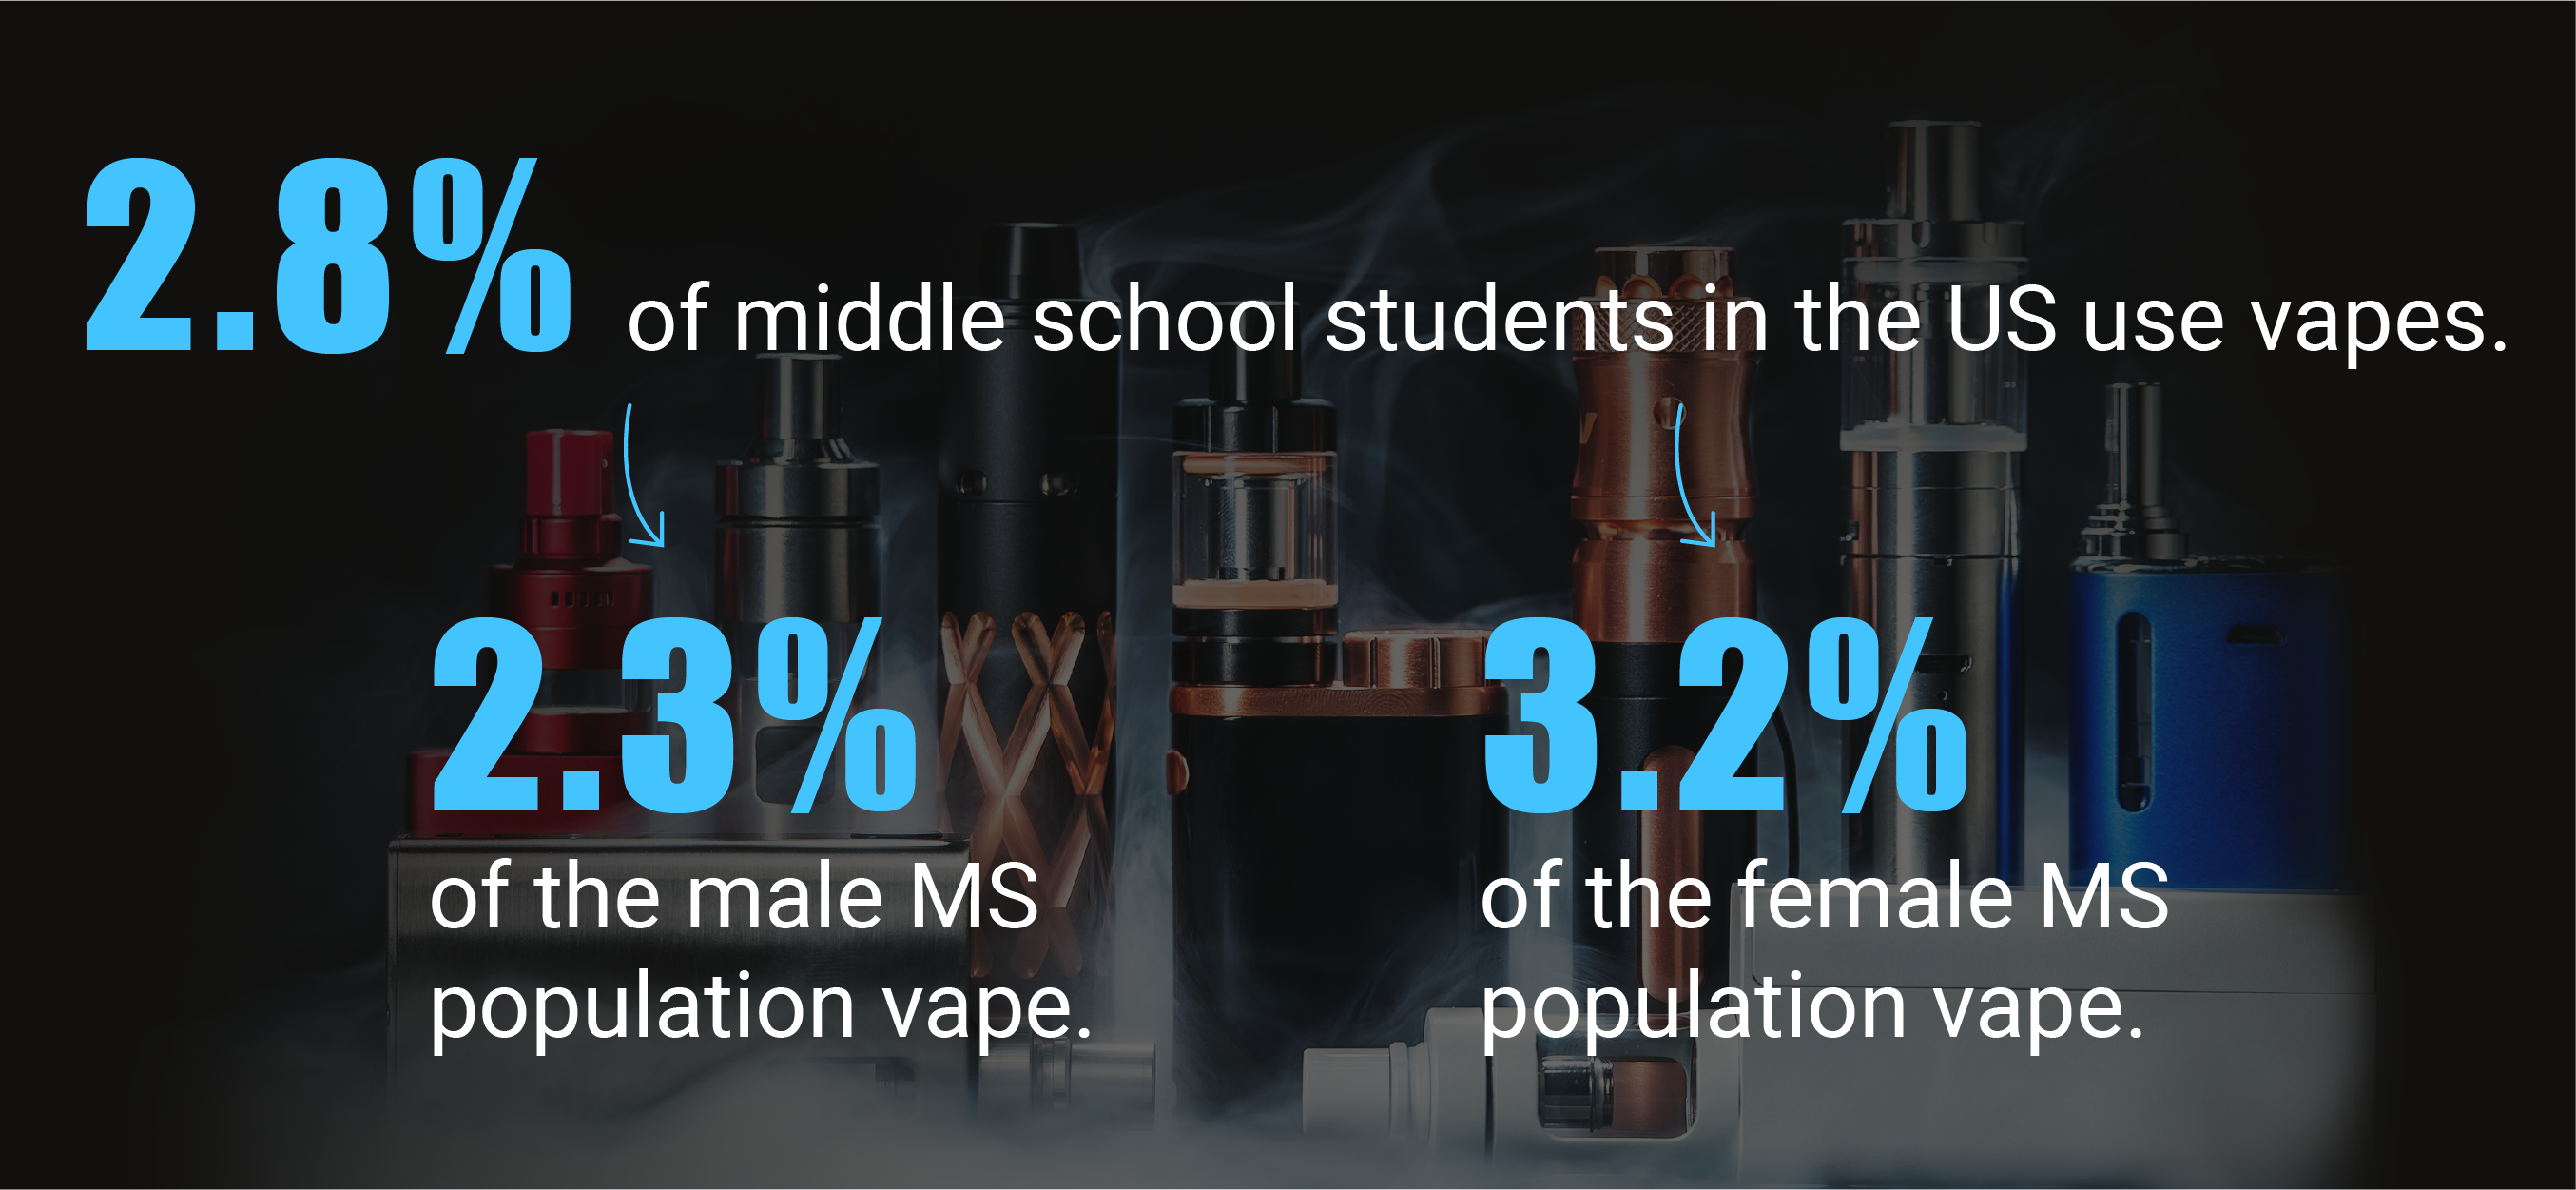 Call out text box showing the prevalence of vaping among middle school students, affecting females more than males.